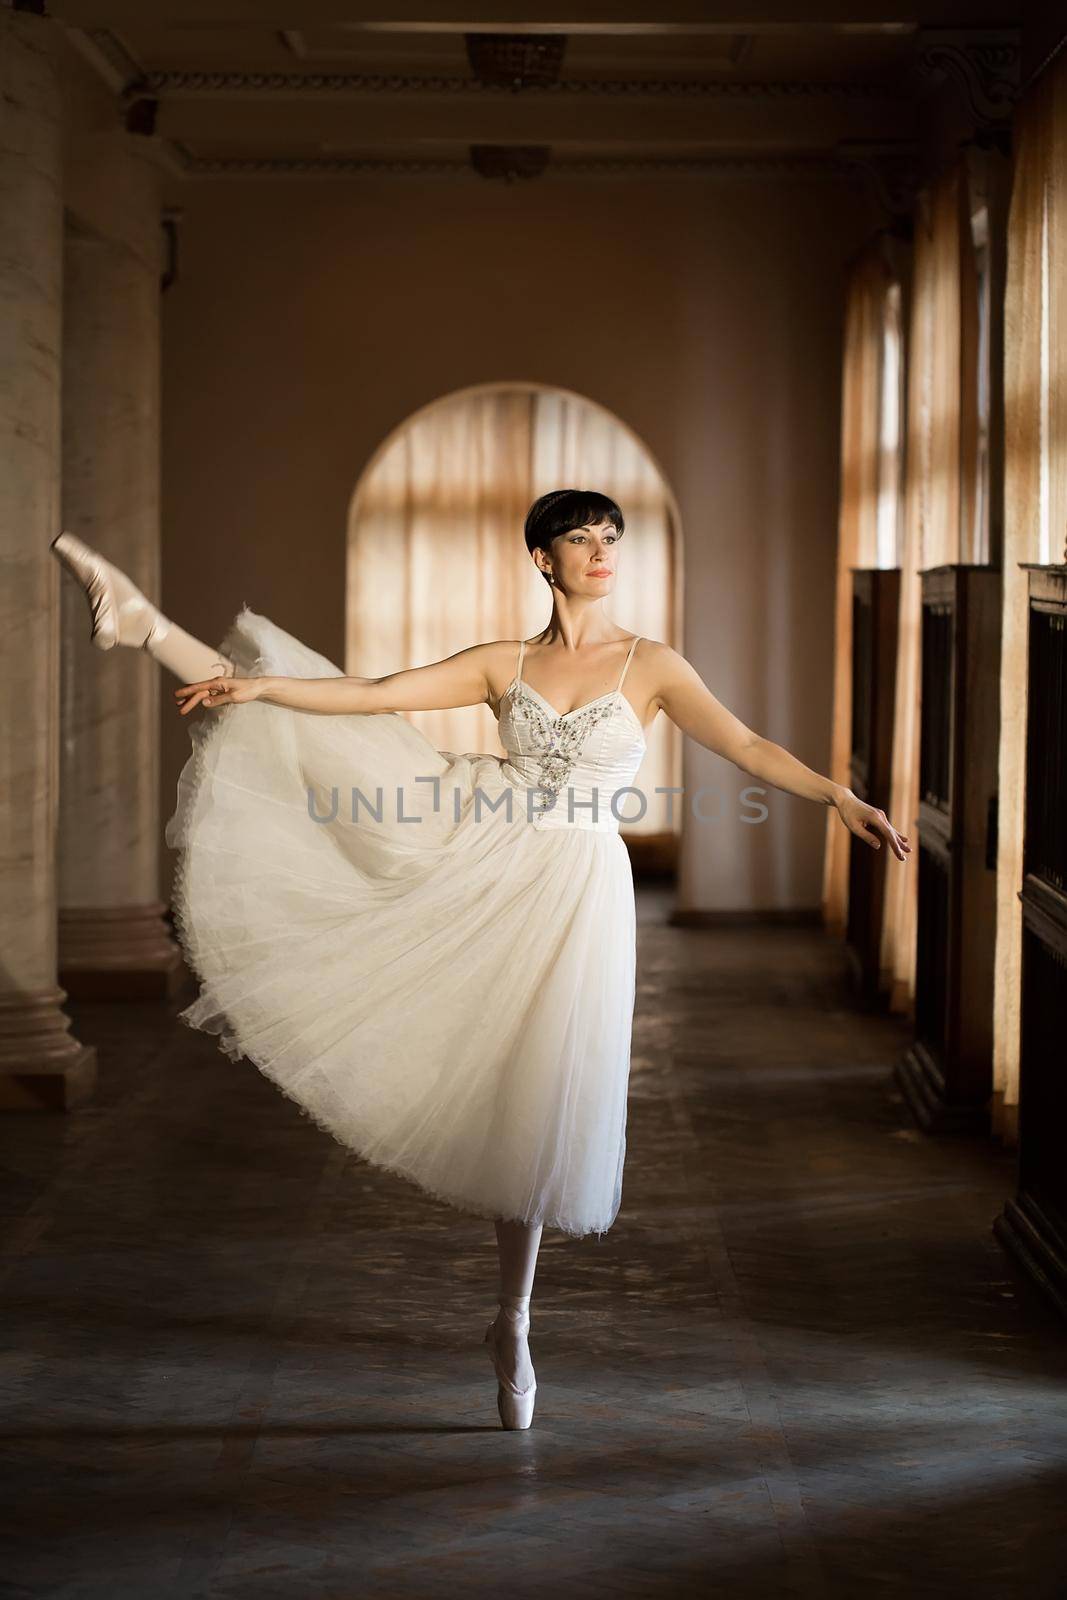 Adult ballerina practicing in the hall of the theatre